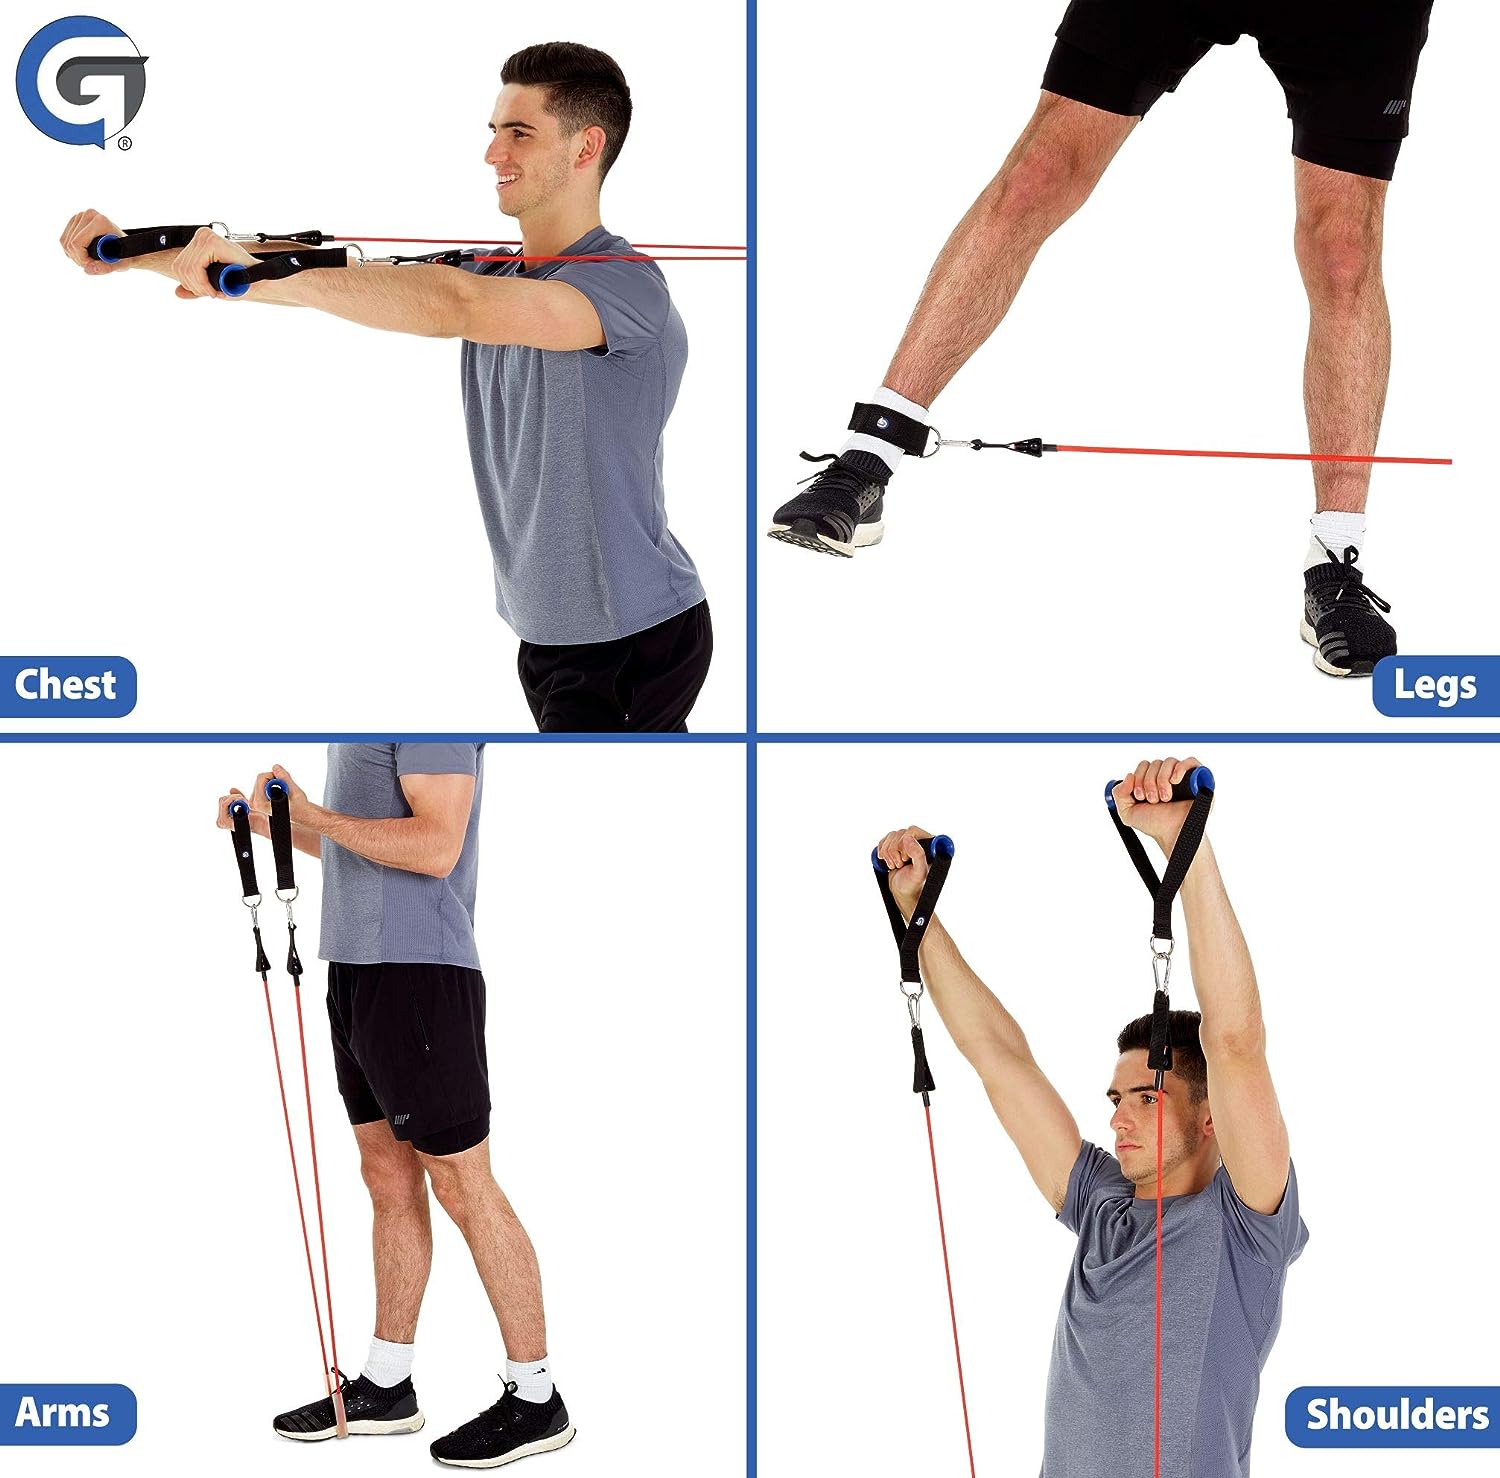 Geez Fitness Resistance Bands Full Set for Women and Men, Mobility, Strength Training Body  Injury Rehab, Door Anchor, Bands for Chest, Thighs, Legs, Arms, glutes, ankle straps  handles. Free Ebook.